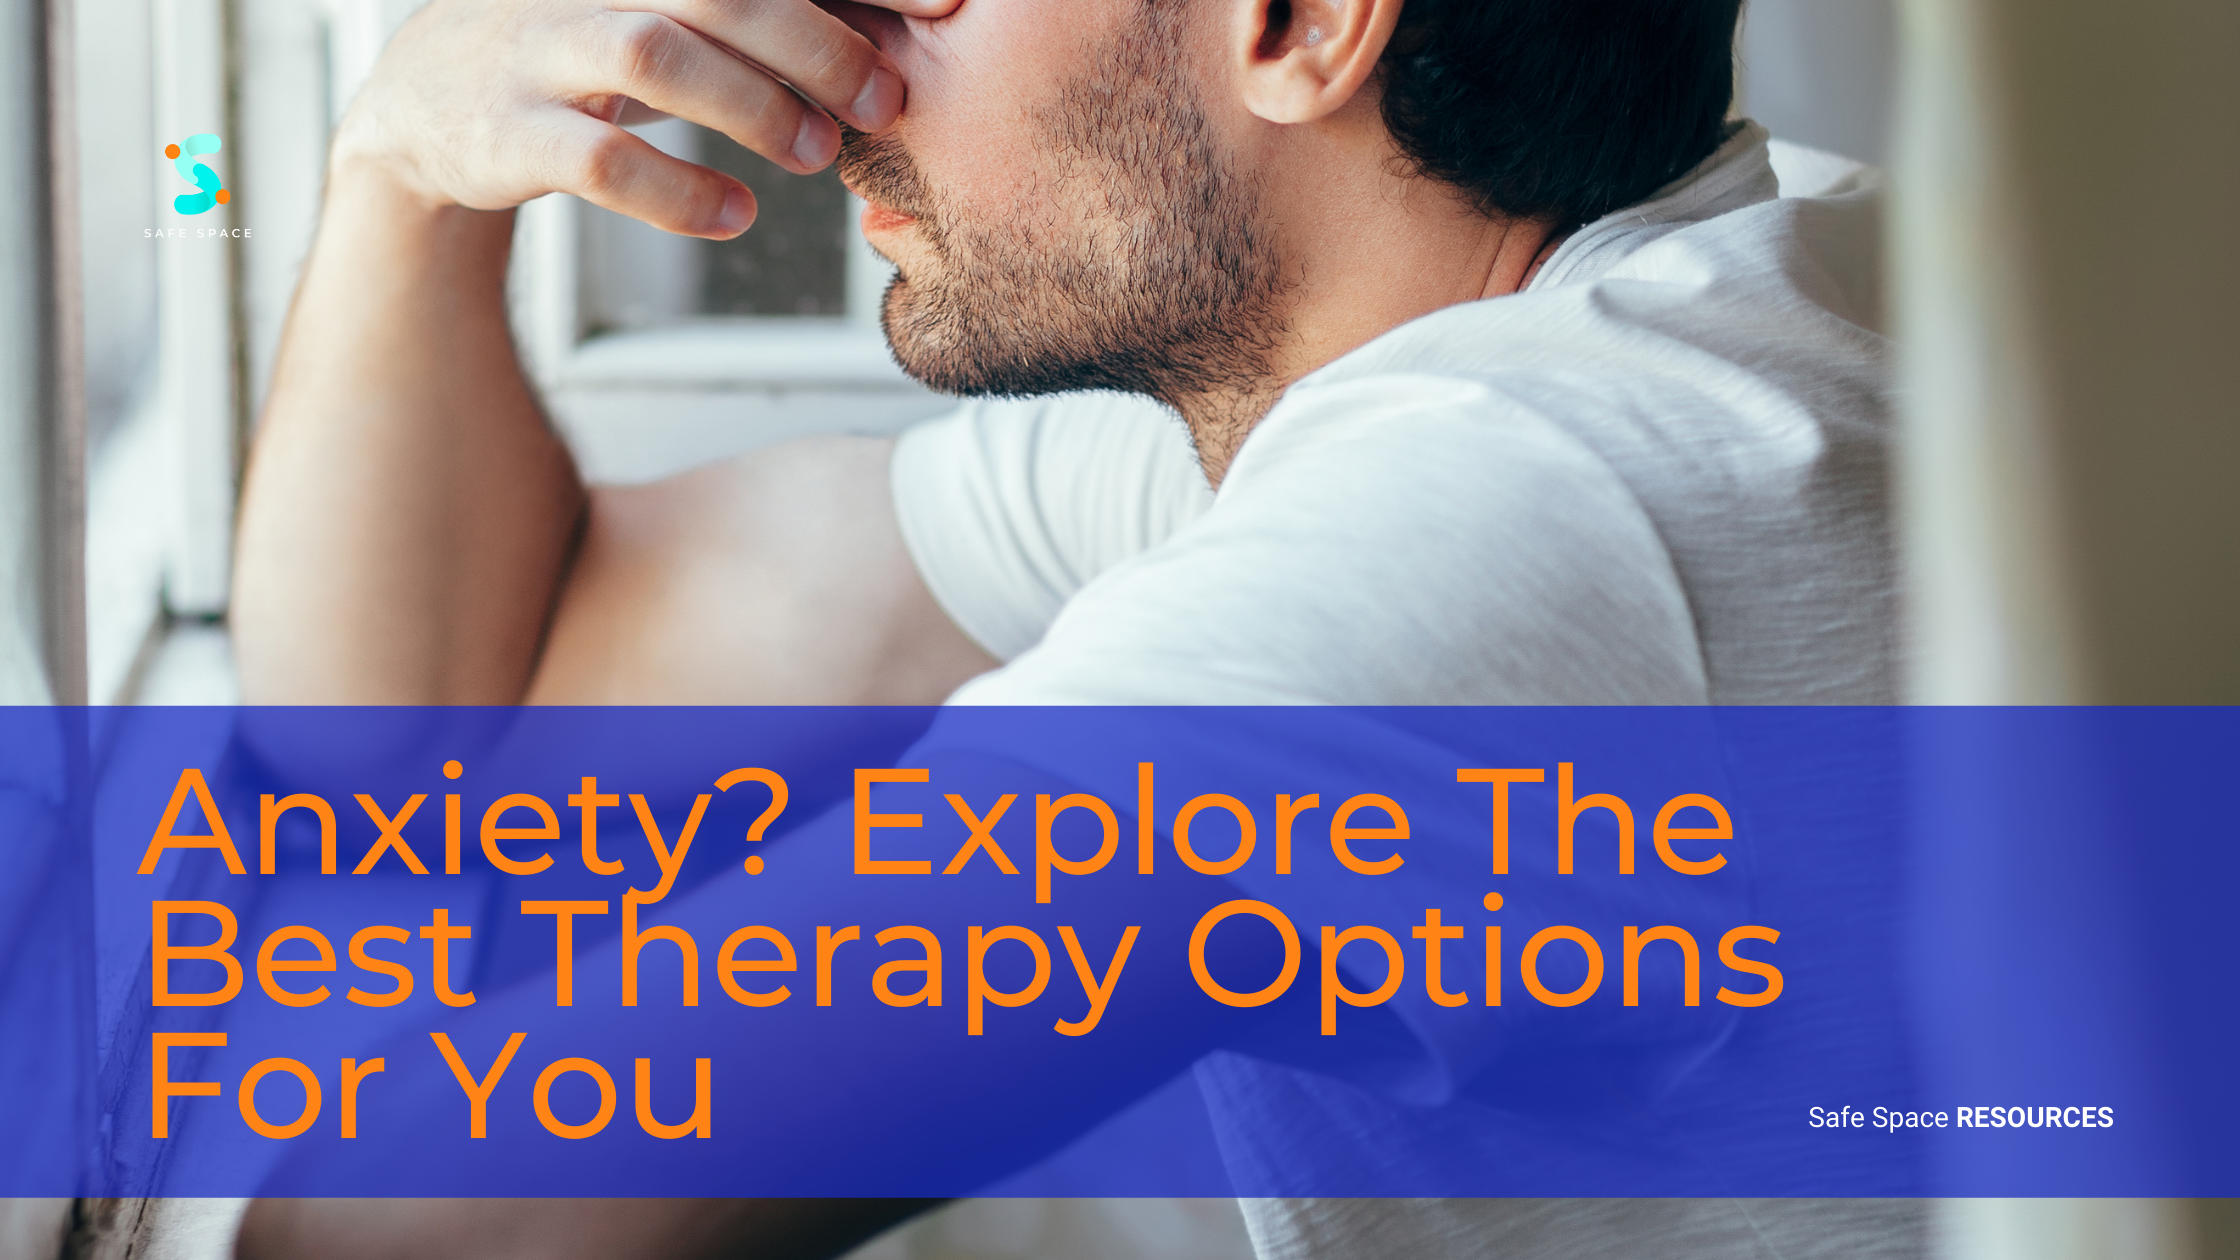 Experiencing Anxiety? Explore The Benefits of Therapy